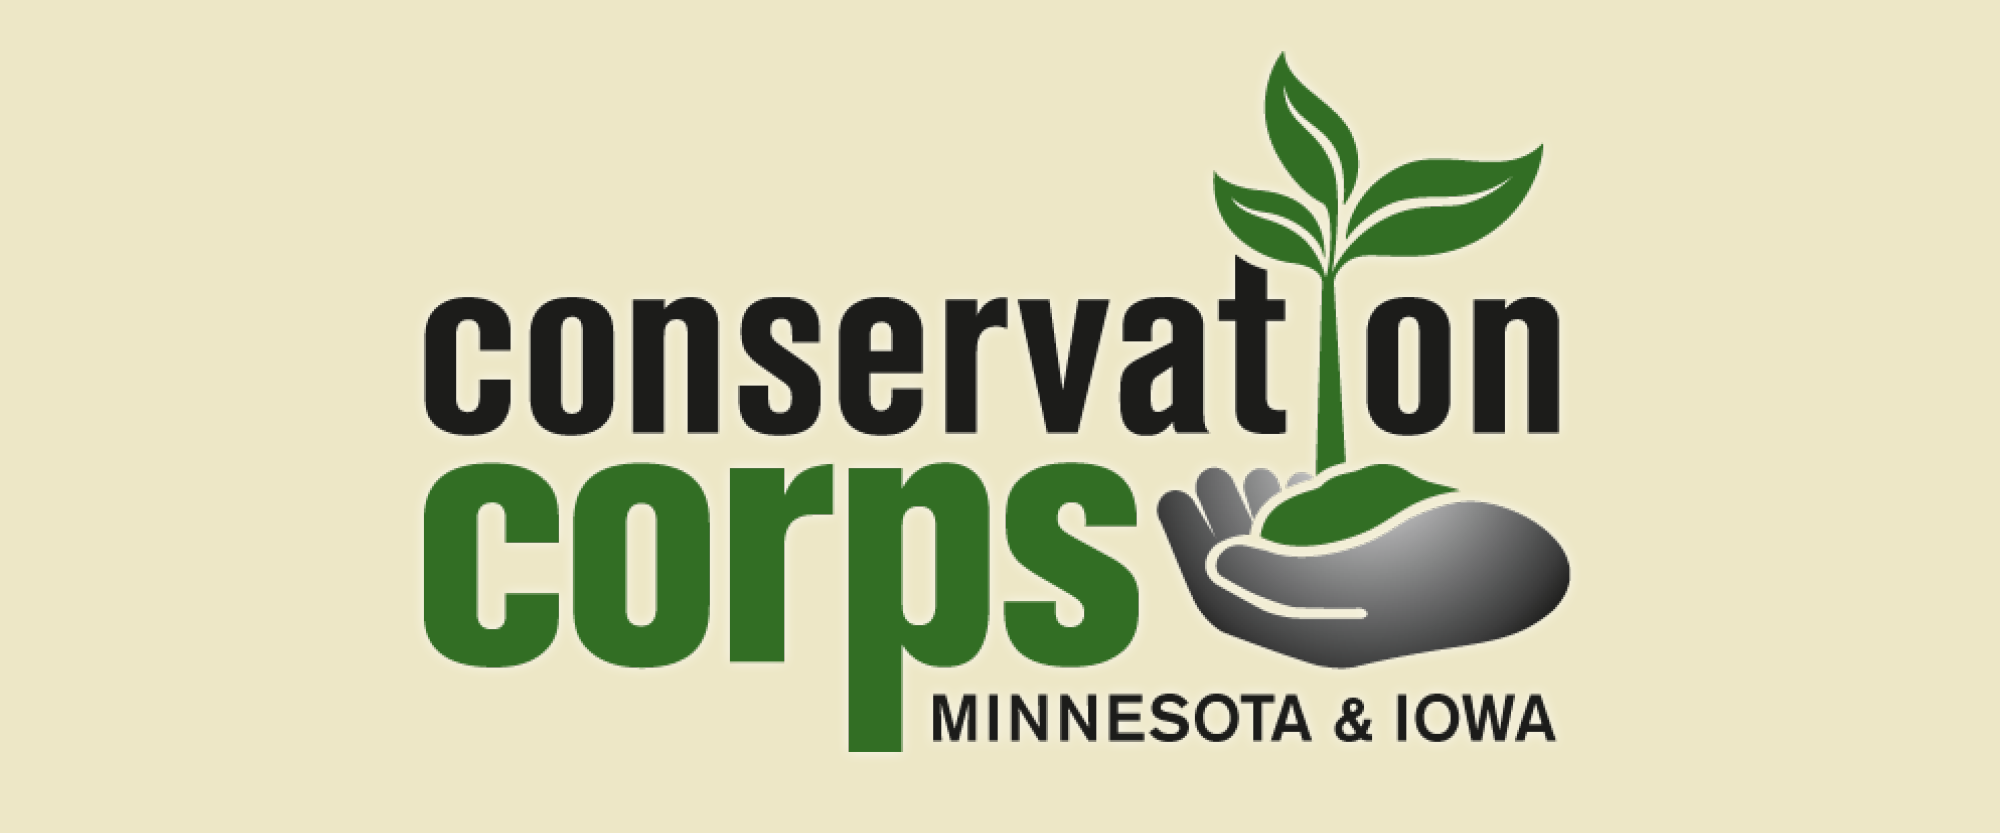 Conservation Corps's Logo